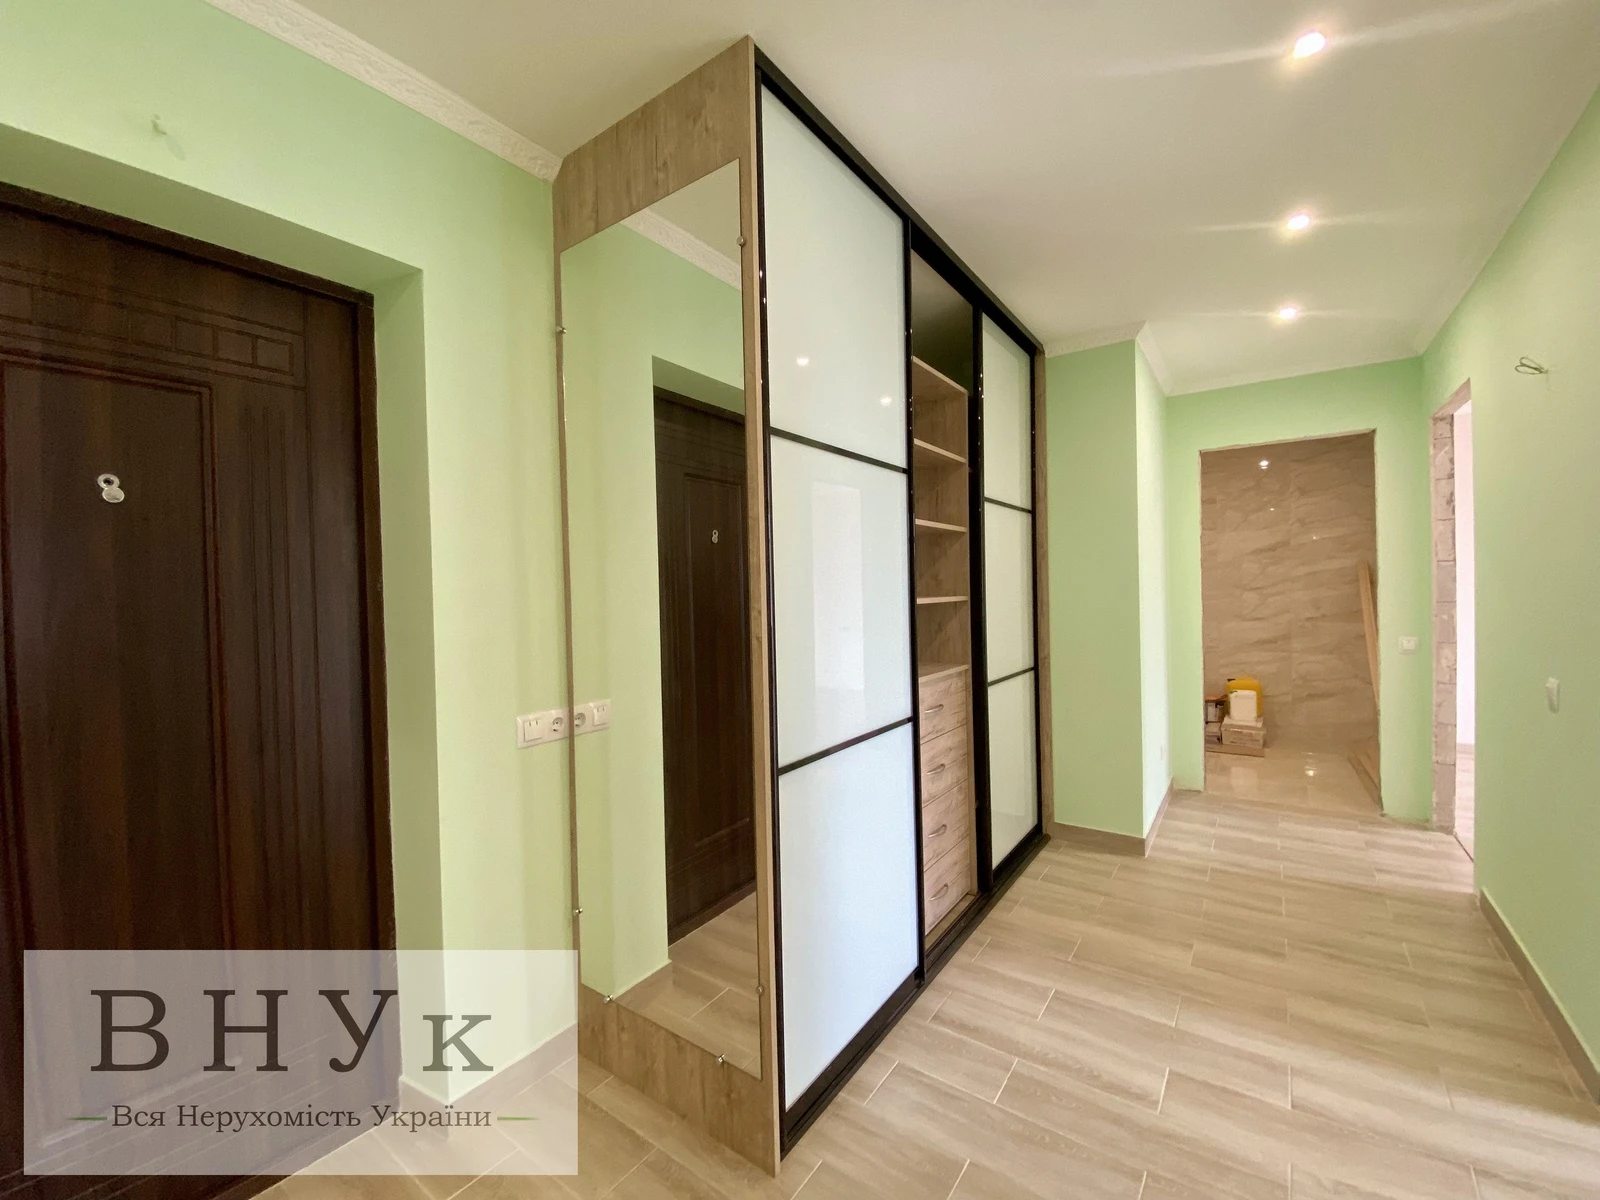 Apartments for sale. 2 rooms, 72 m², 2nd floor/11 floors. Ovocheva vul., Ternopil. 